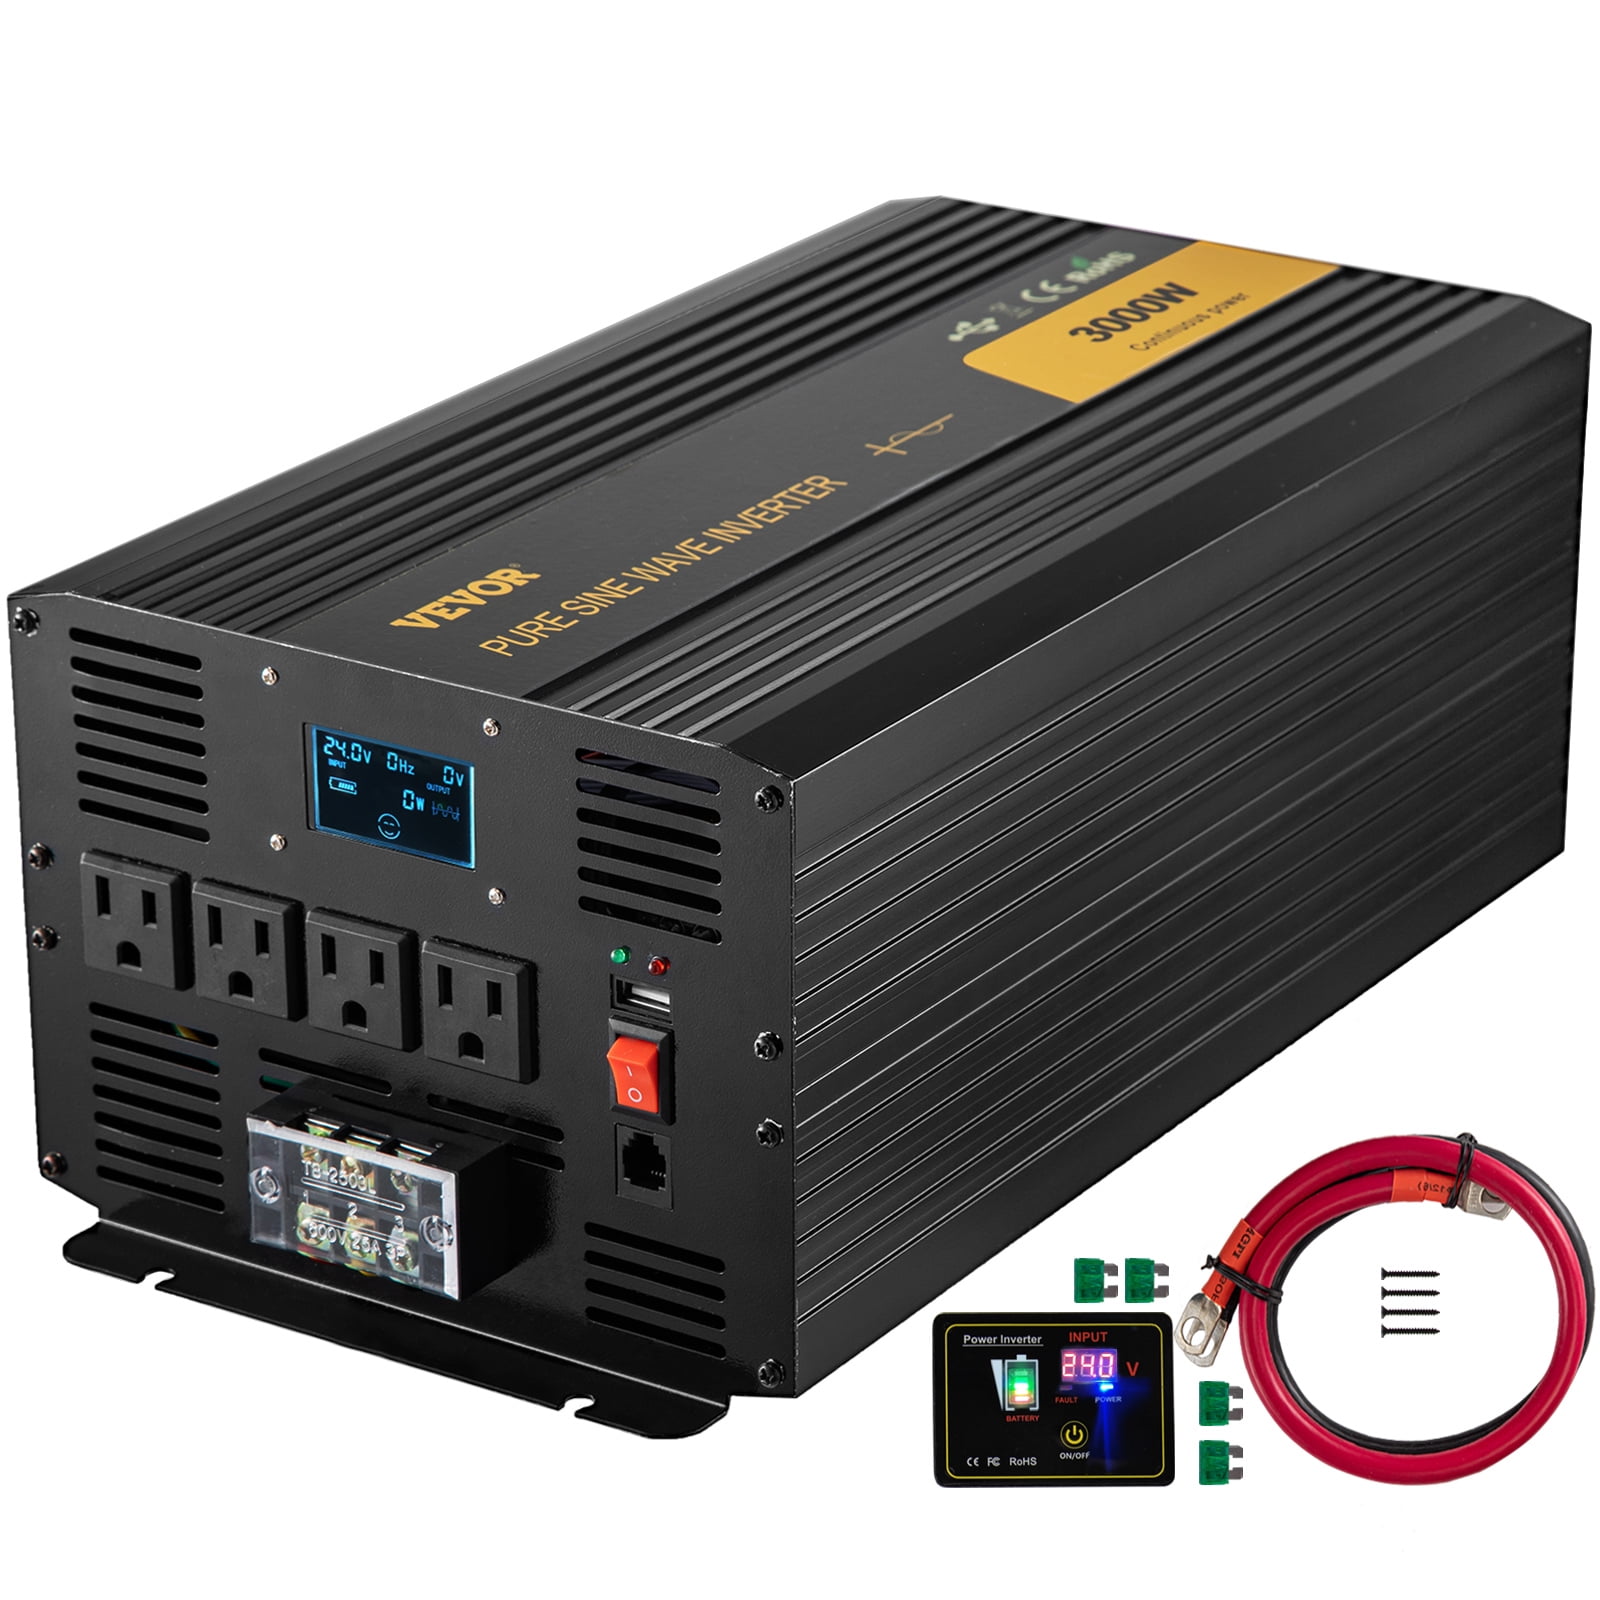 5000w LF pure sine wave power inverter dc 24v/ac110v/battery charger/power tool